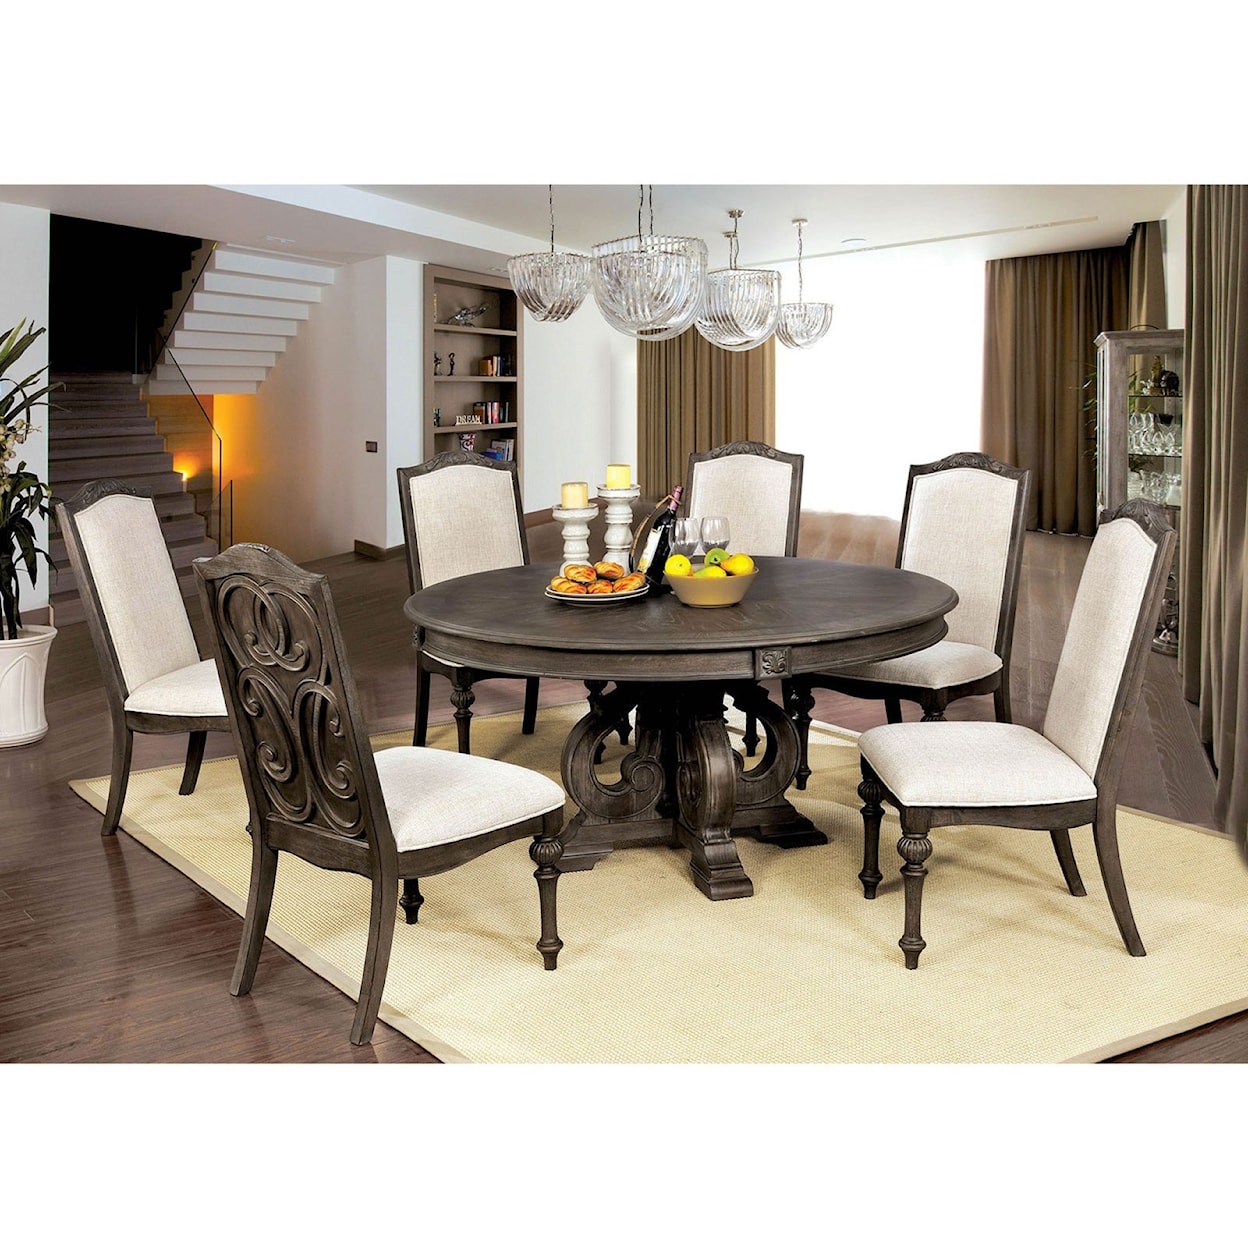 Furniture of America Arcadia Round Dining Table